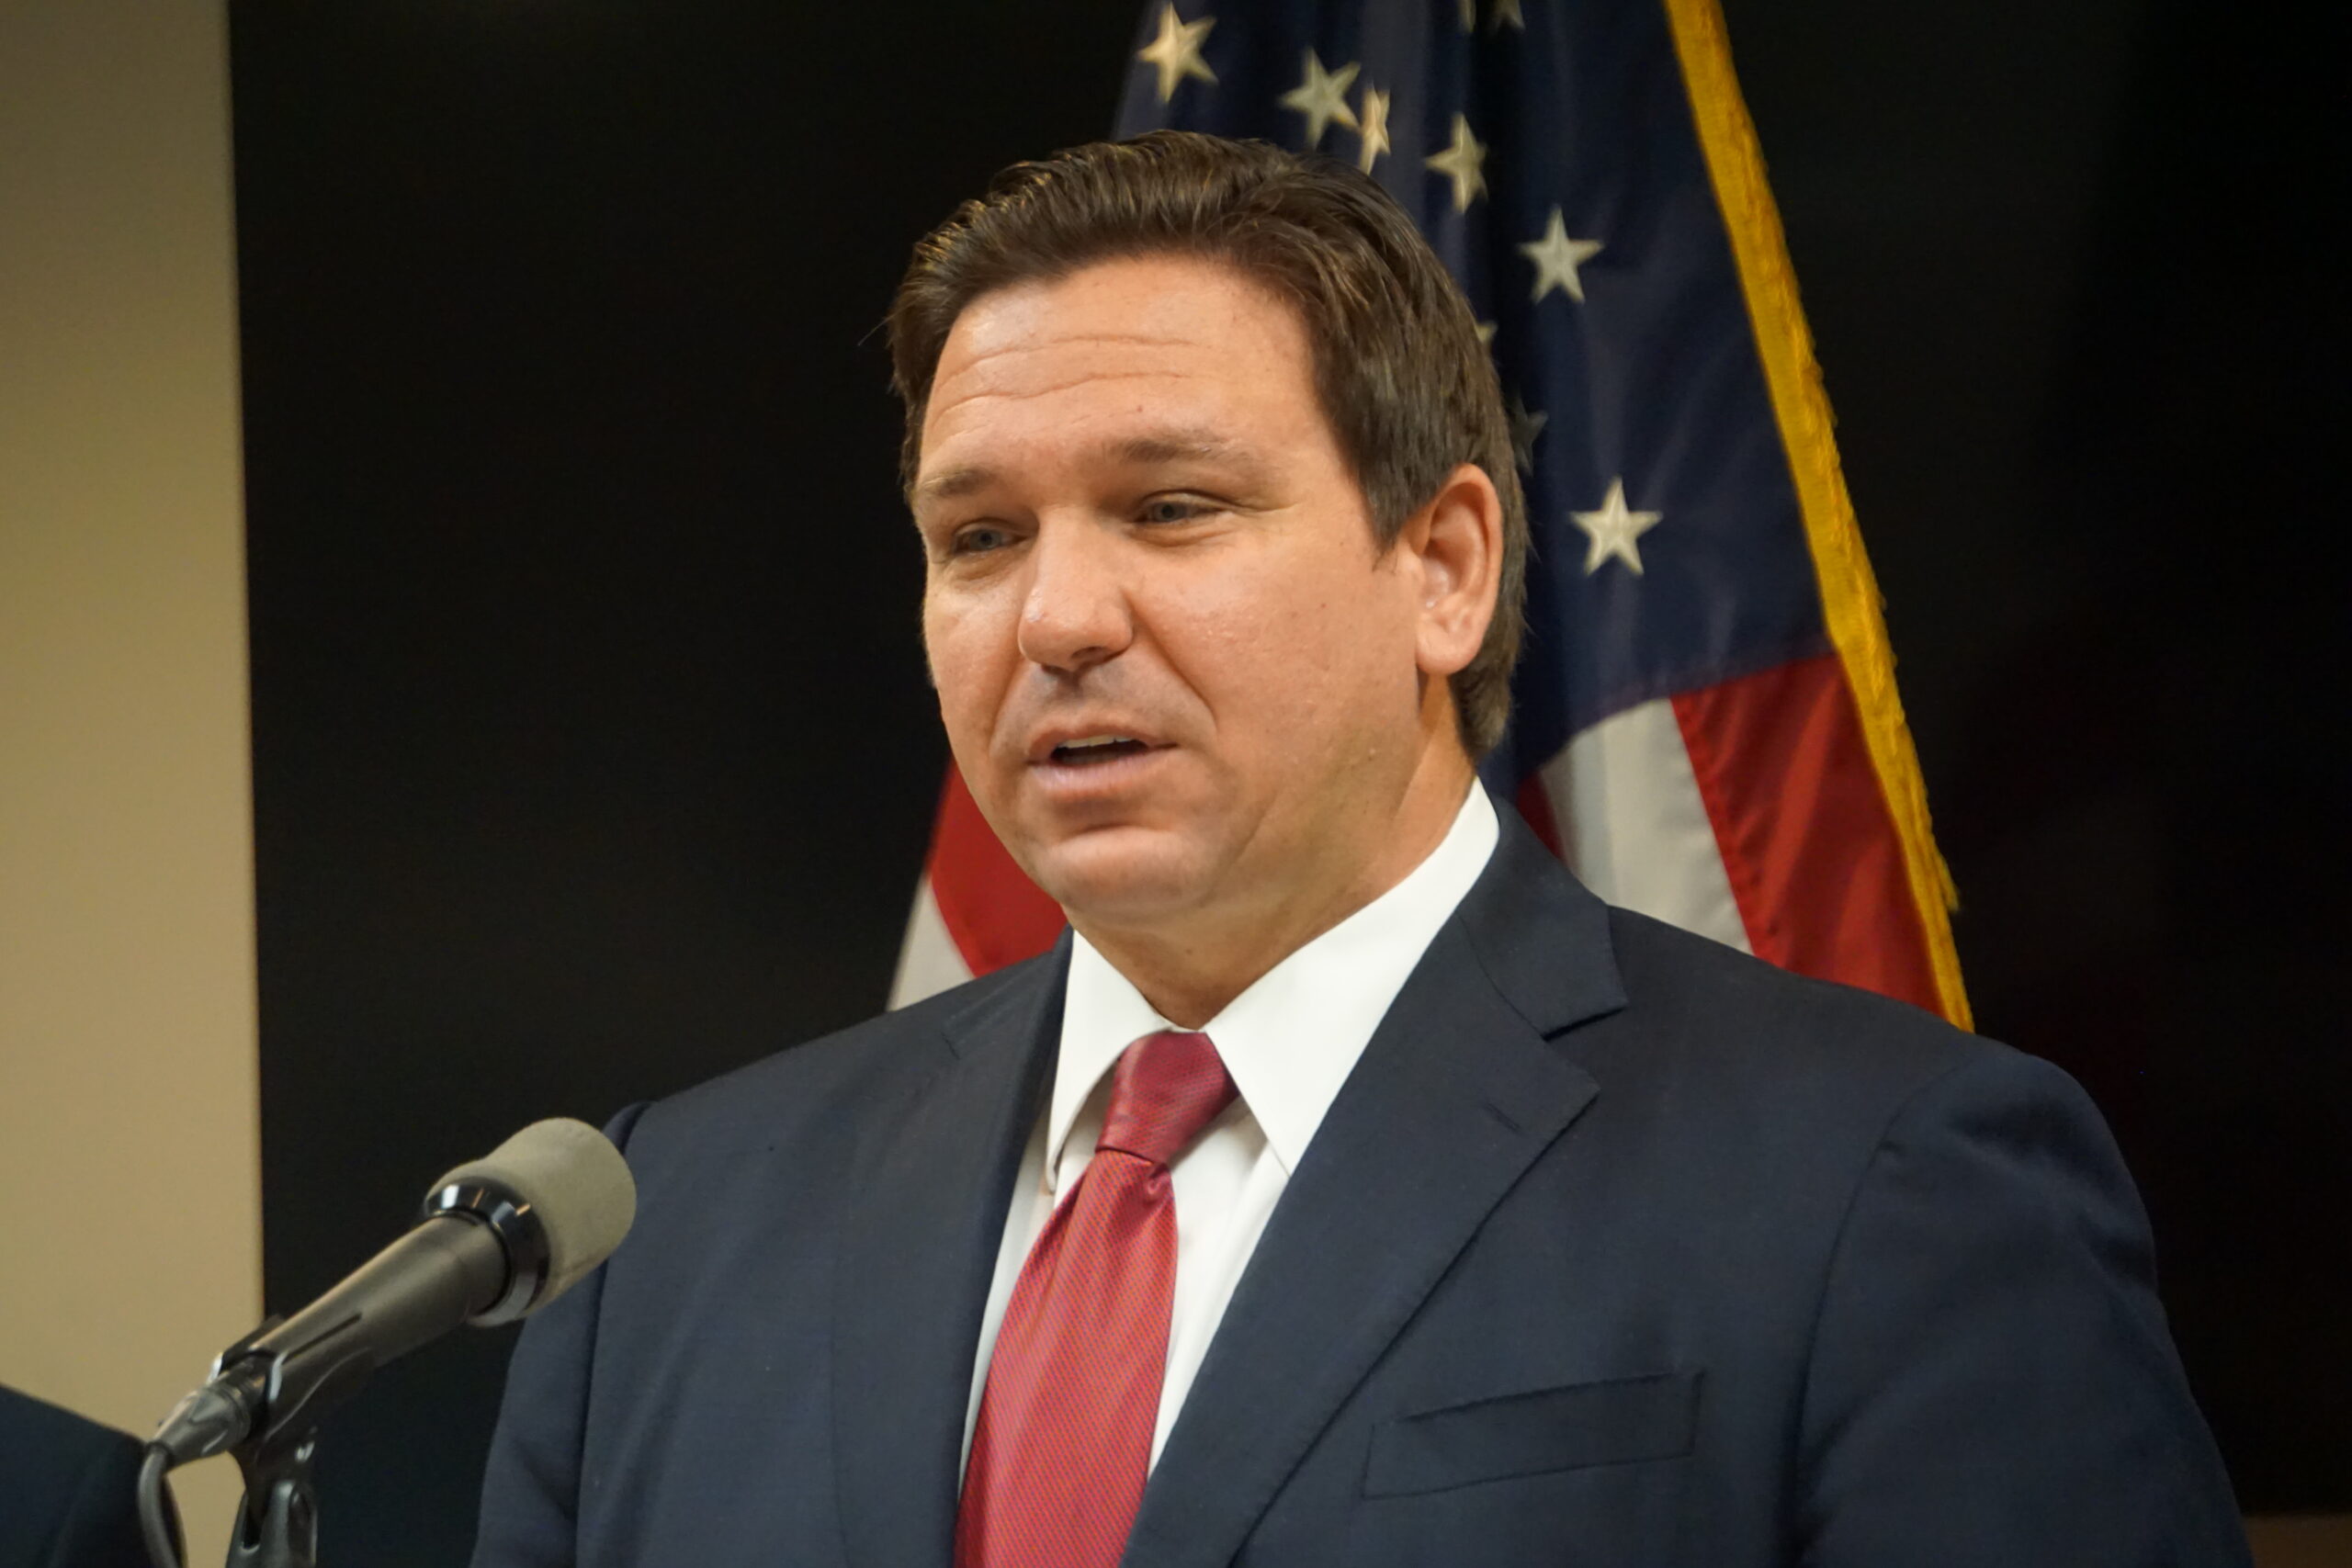 DeSantis 'Will Fully Fund' gas tax Holiday, Increase Teacher and First Responder Pay